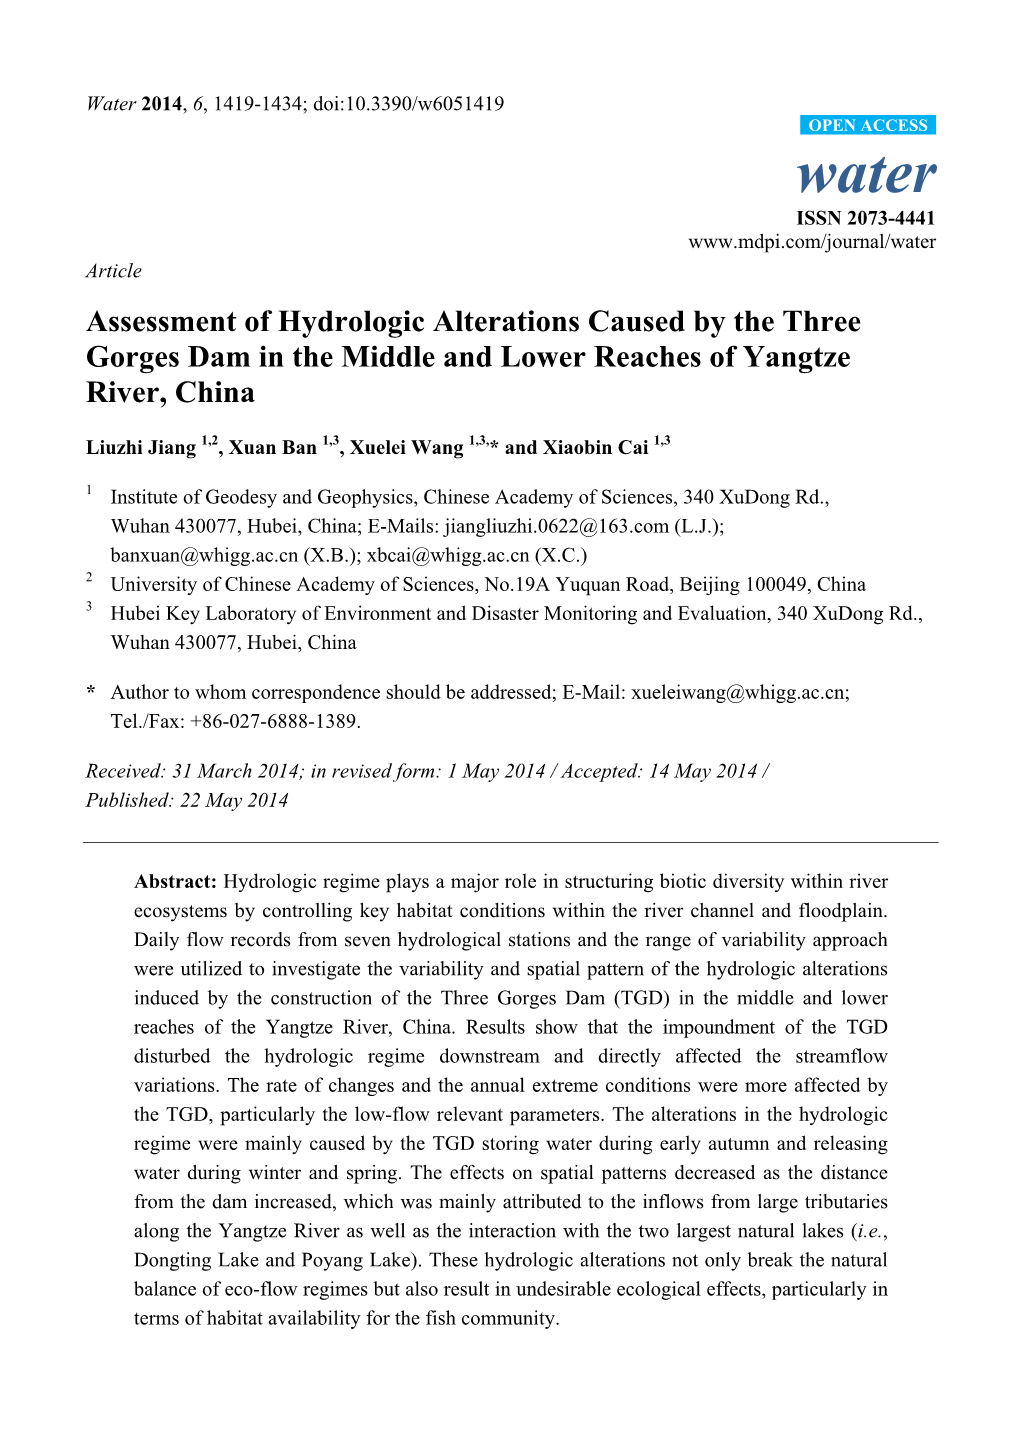 Assessment of Hydrologic Alterations Caused by the Three Gorges Dam in the Middle and Lower Reaches of Yangtze River, China